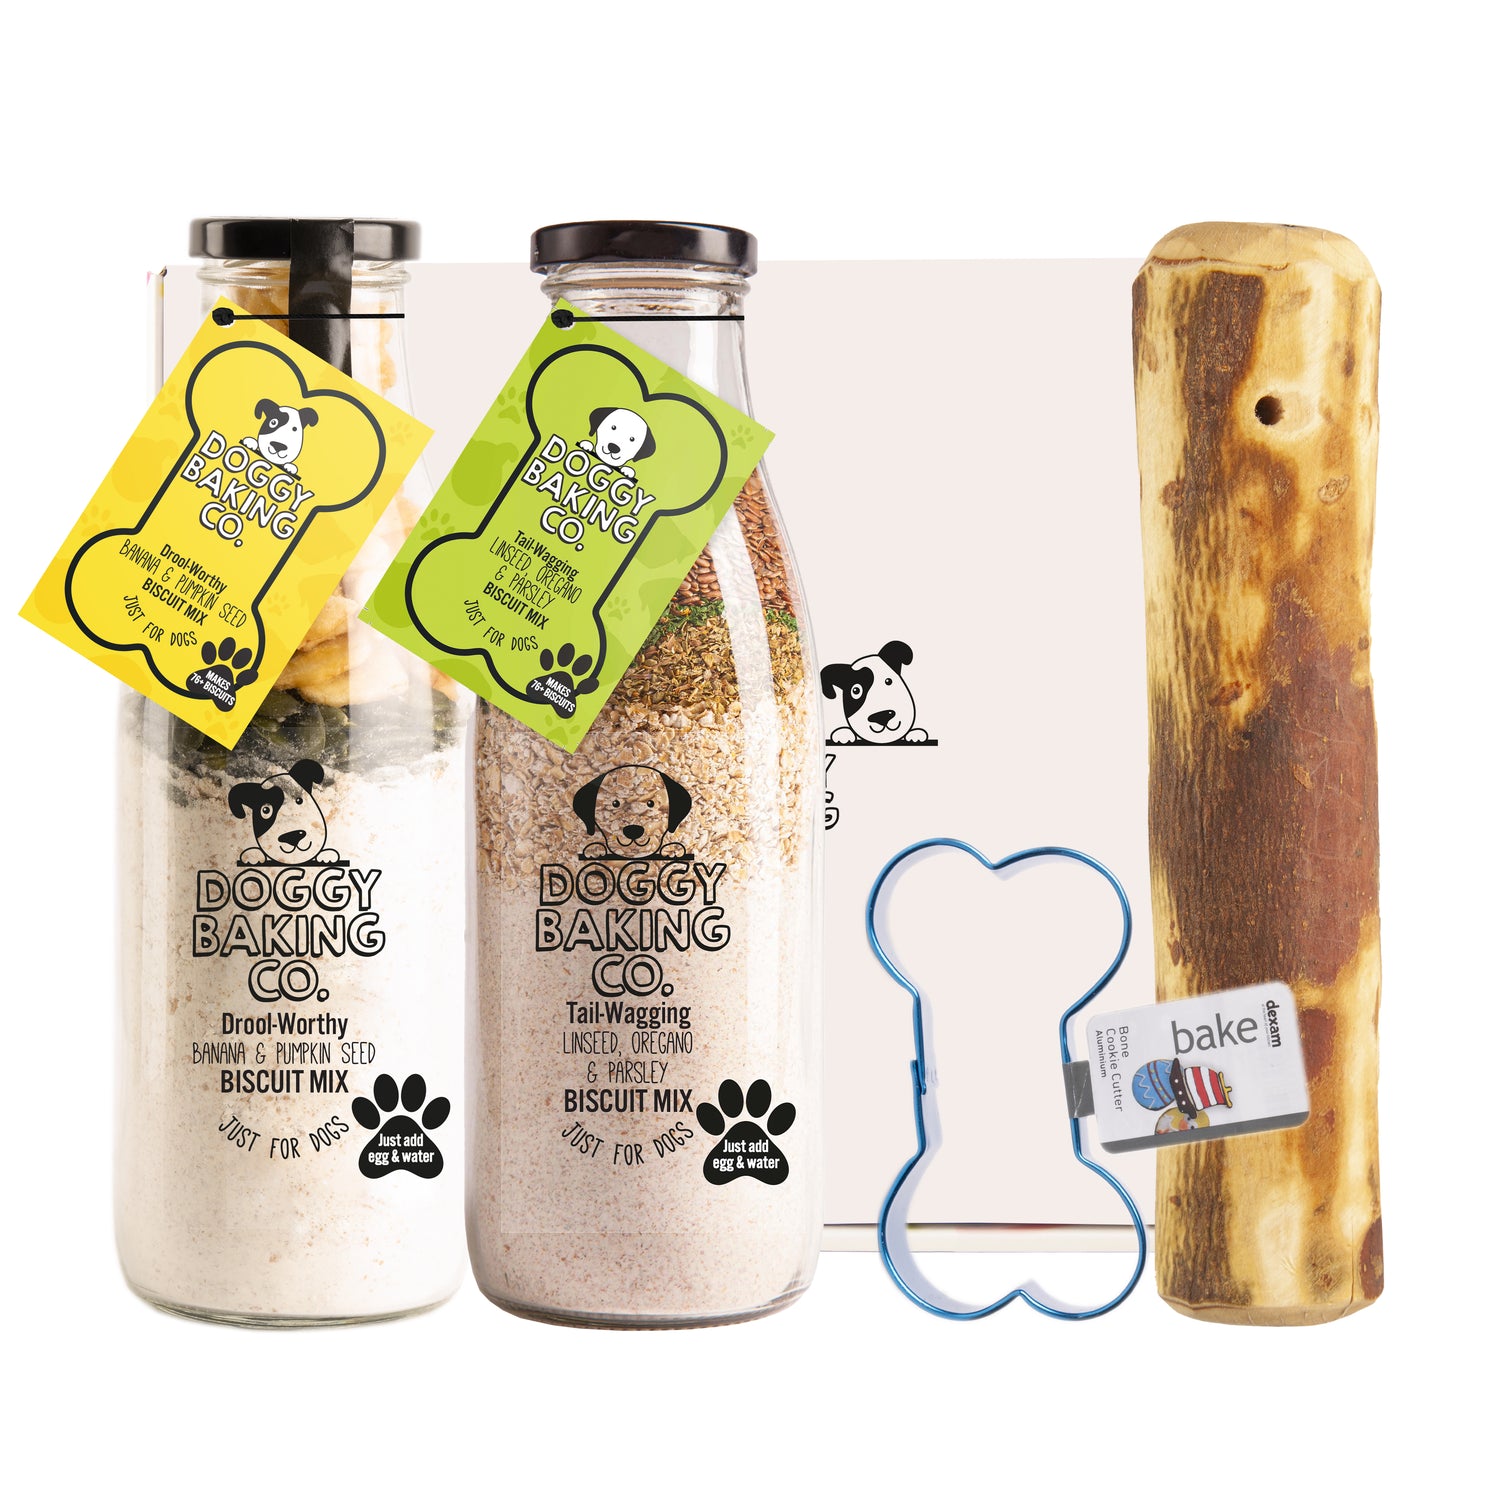 Two Biscuit Bottles, Bone Cutter & Olivewood Chew in a Gift Box - Doggy Baking Co by The Bottled Baking Co